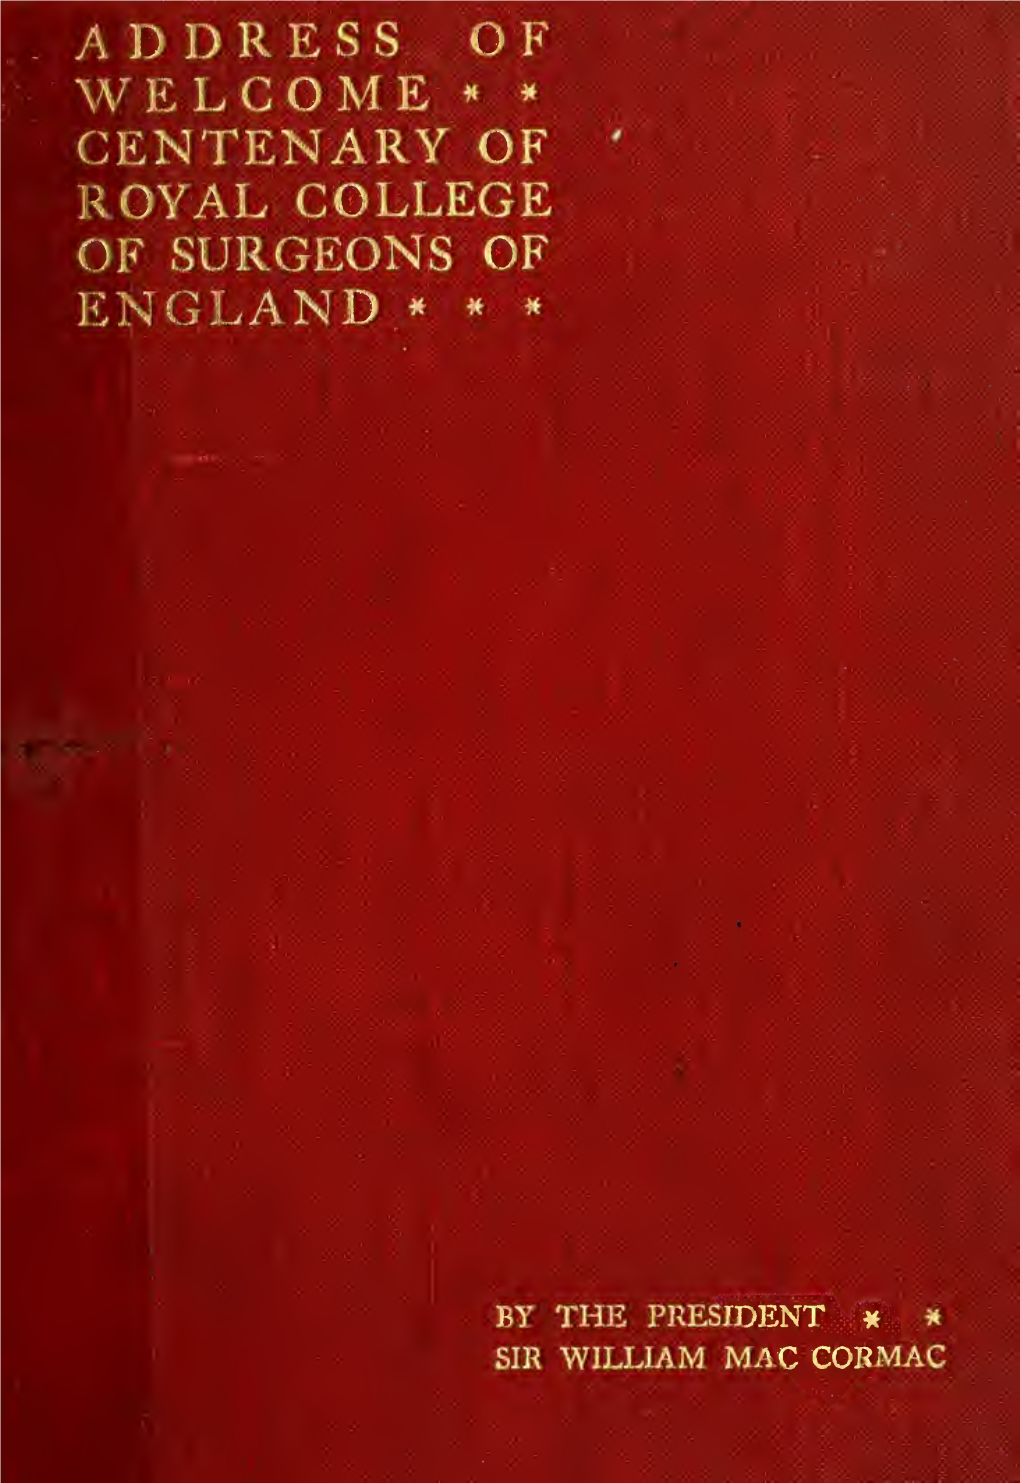 An Address of Welcome Delivered on the Occasion of the Centenary Festival of the Royal College of Surgeons of England on Thursday, July 26, 1900